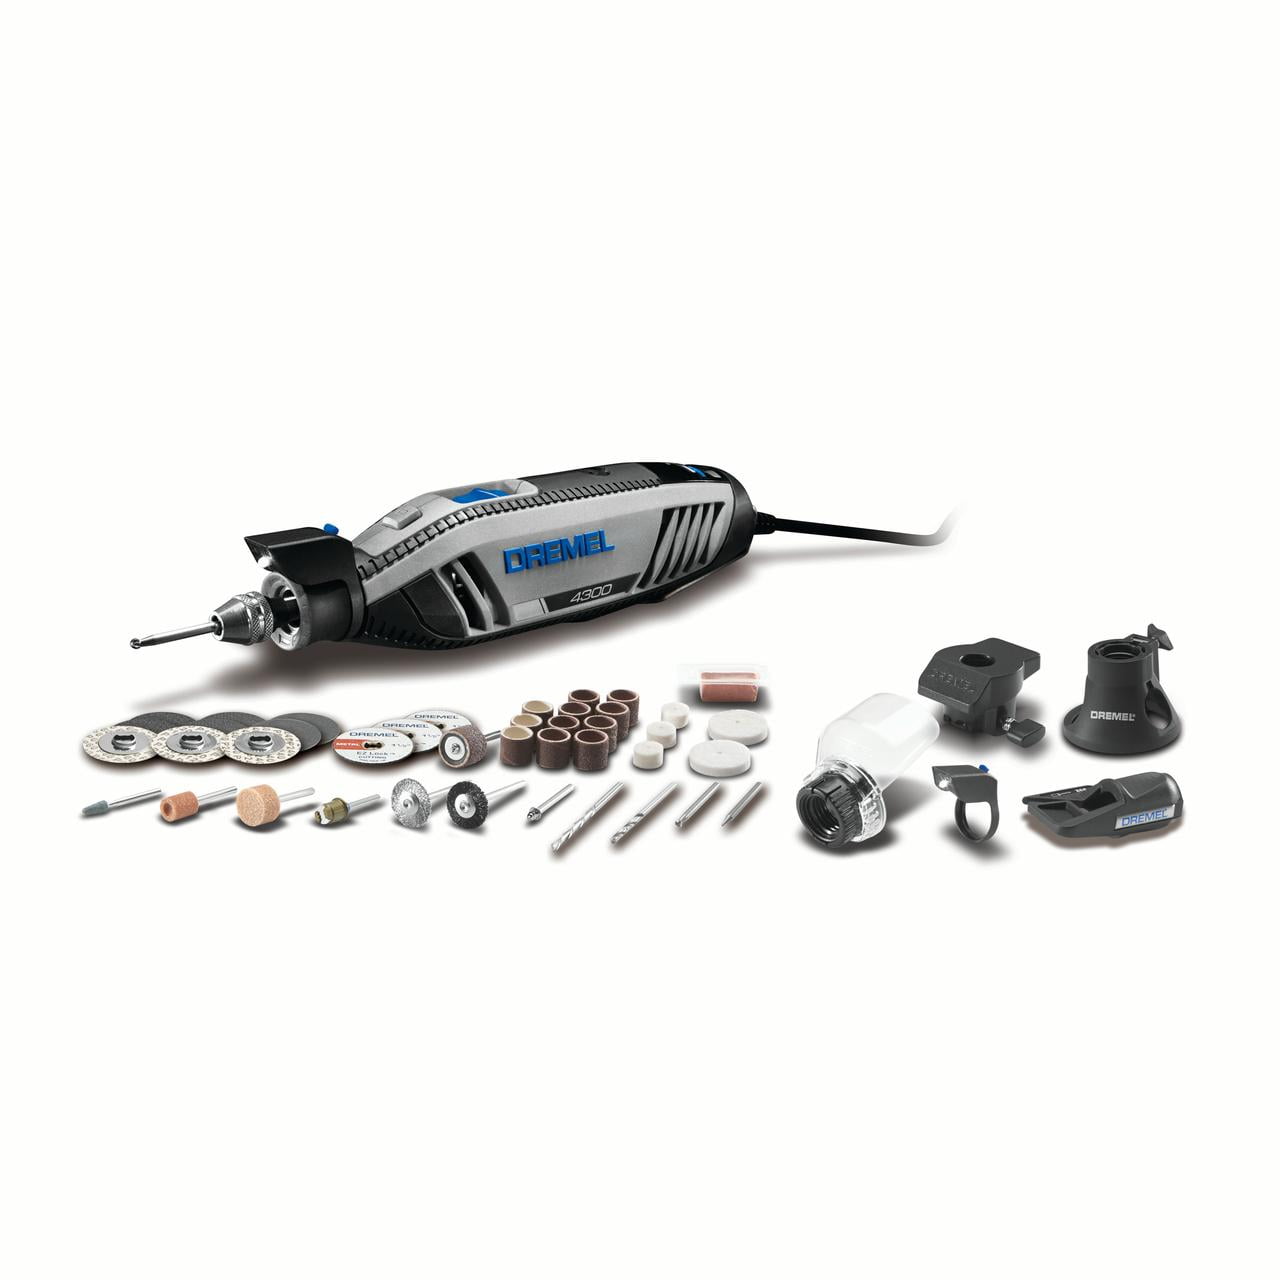 Dremel 4000-6/50 High Performance Rotary Tool Kit with Flex Shaft- 6  Attachments & 50 Accessories- Grinder, Mini Sander, Polisher, Engraver-  Perfect